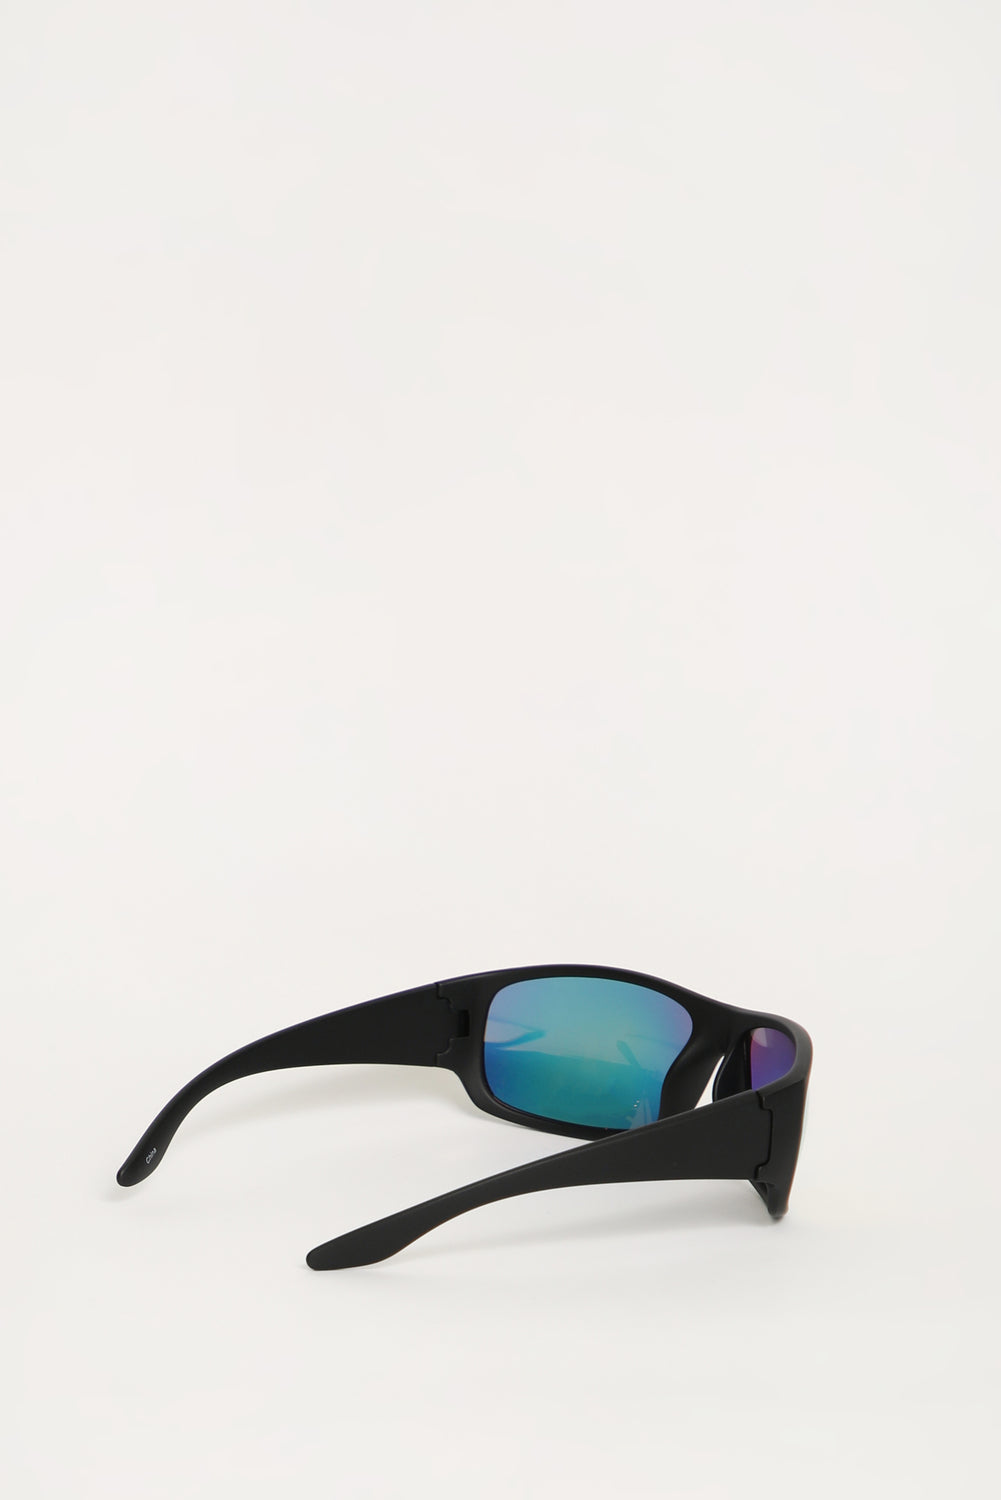 West49 Black Wrapped Sunglasses West49 Black Wrapped Sunglasses